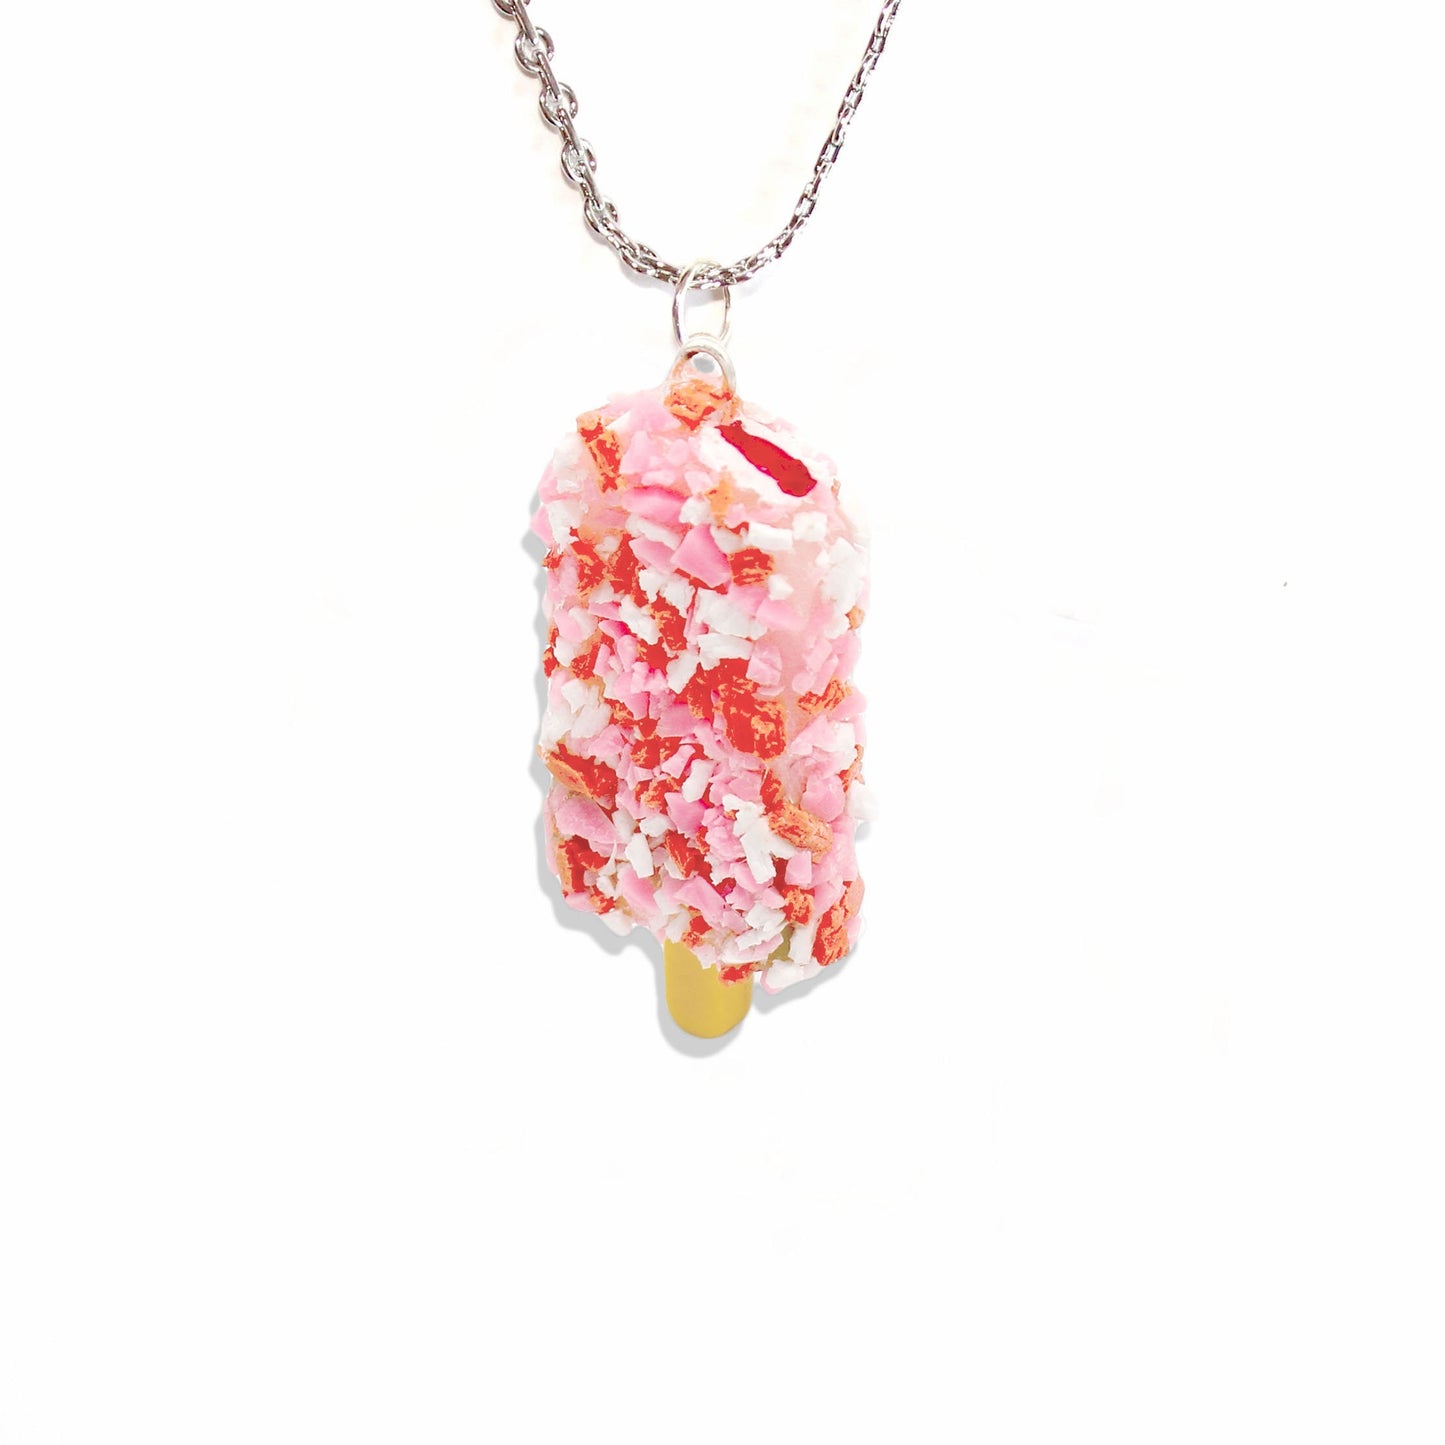 Strawberry Shortcake Ice Cream Bar Necklace - Stainless Steel or Gold